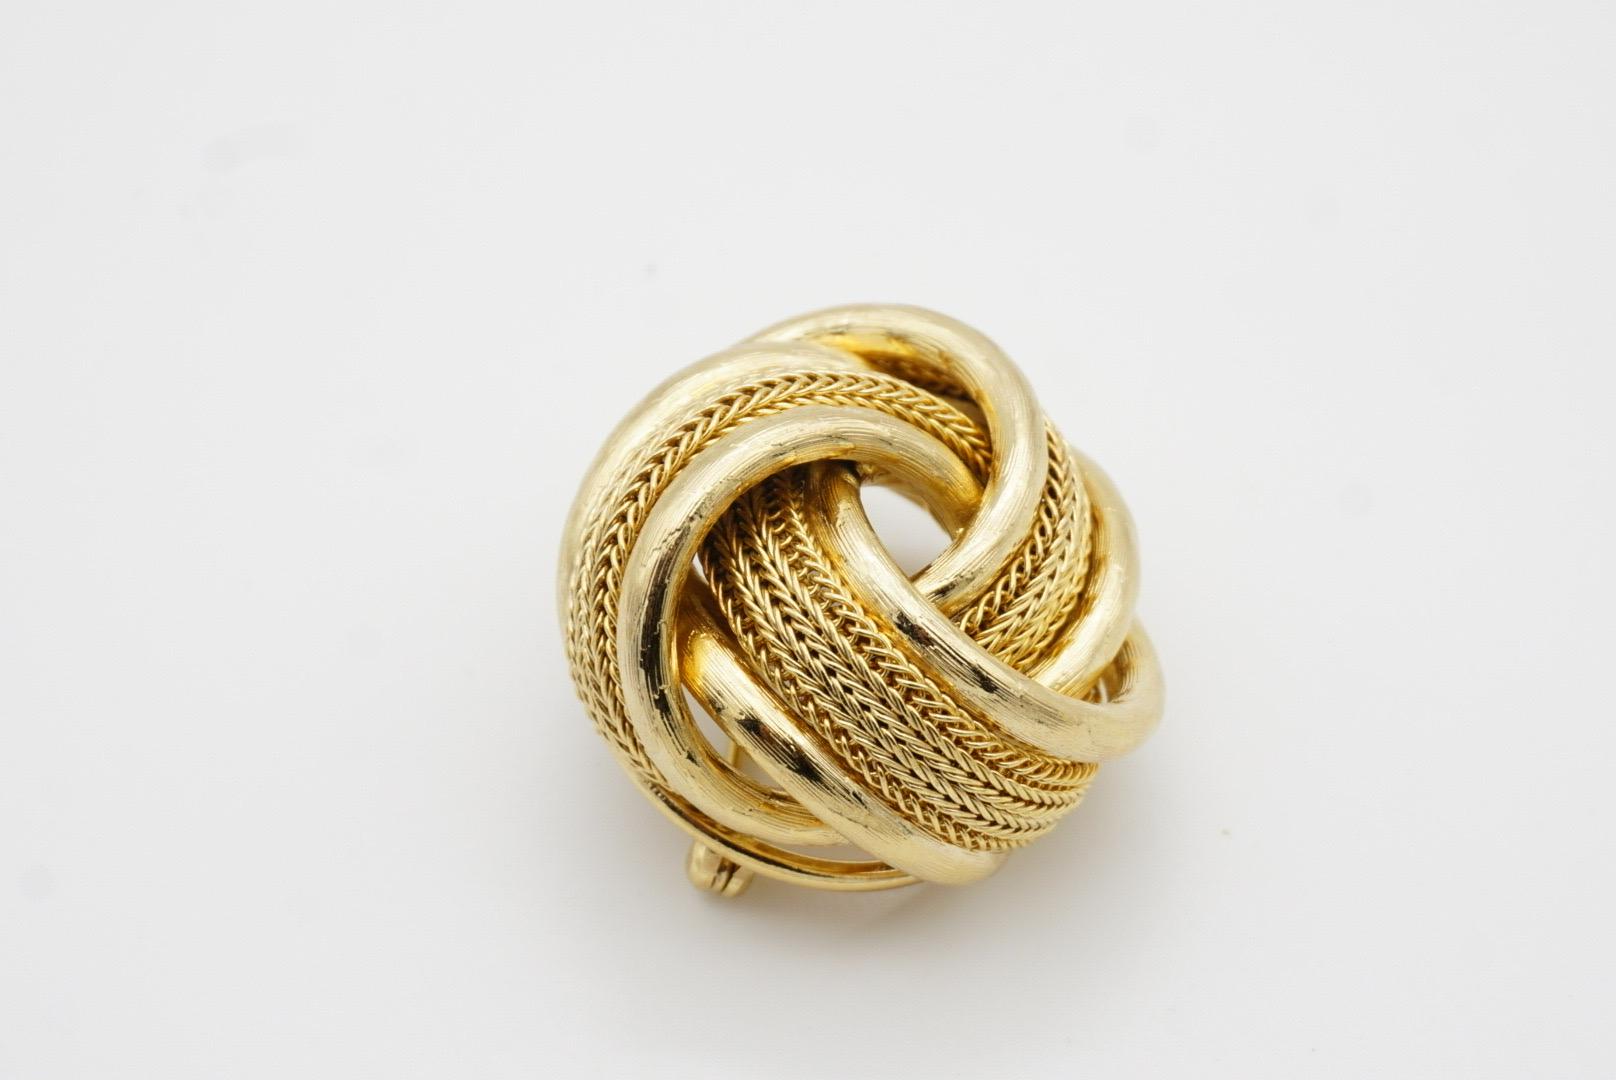 Christian Dior GROSSE 1963 Vintage Knot Rope Glow Mesh Swirl Twist Dome Brooch For Sale 5